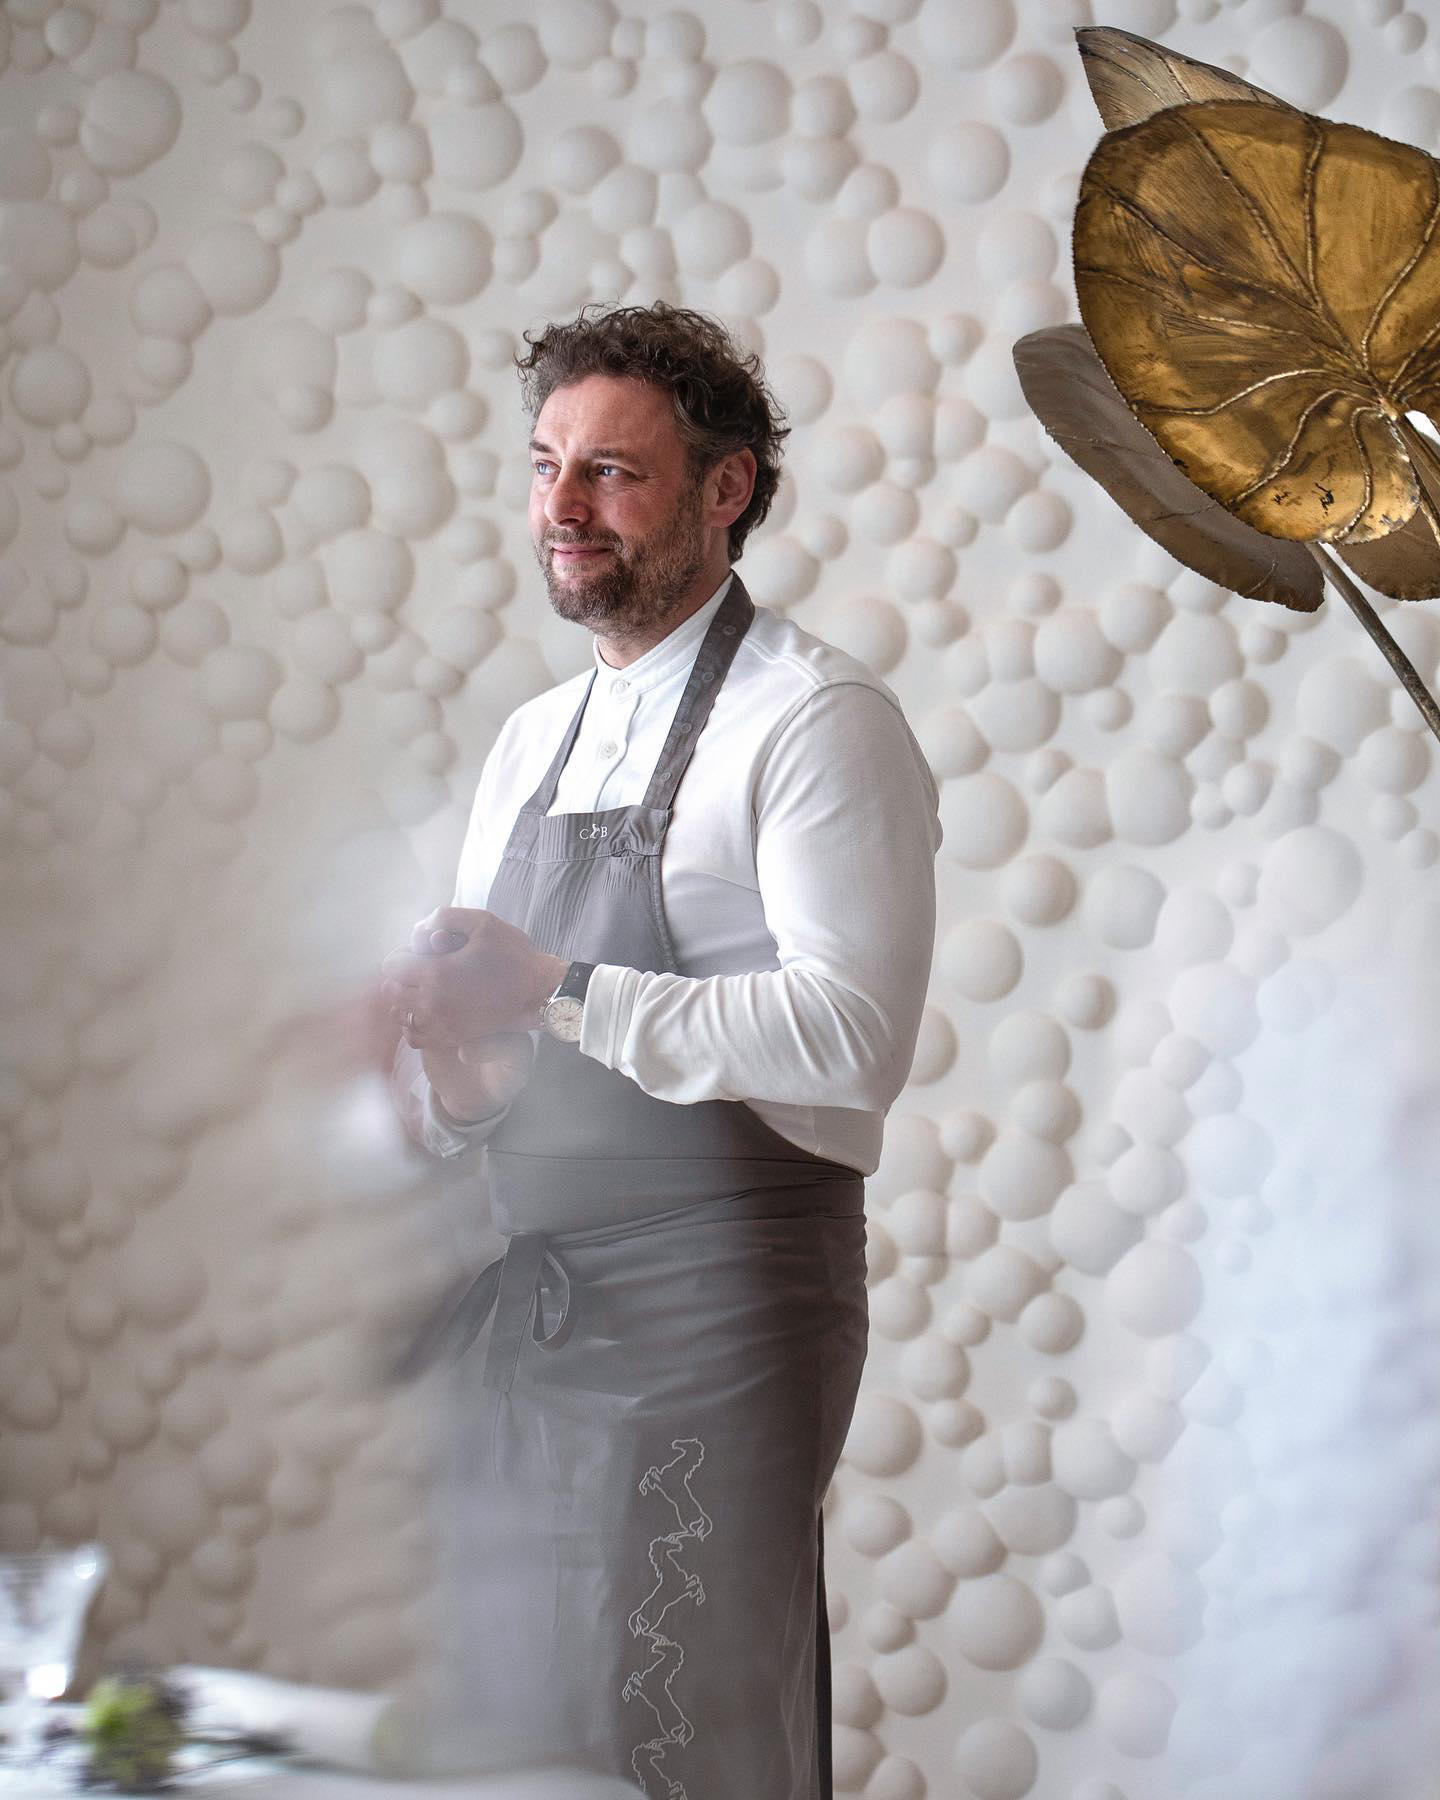 Cheval Blanc Paris - Feel the delicacy, lightness and poetry of Chef Arnaud Donckele's cuisine at Pl